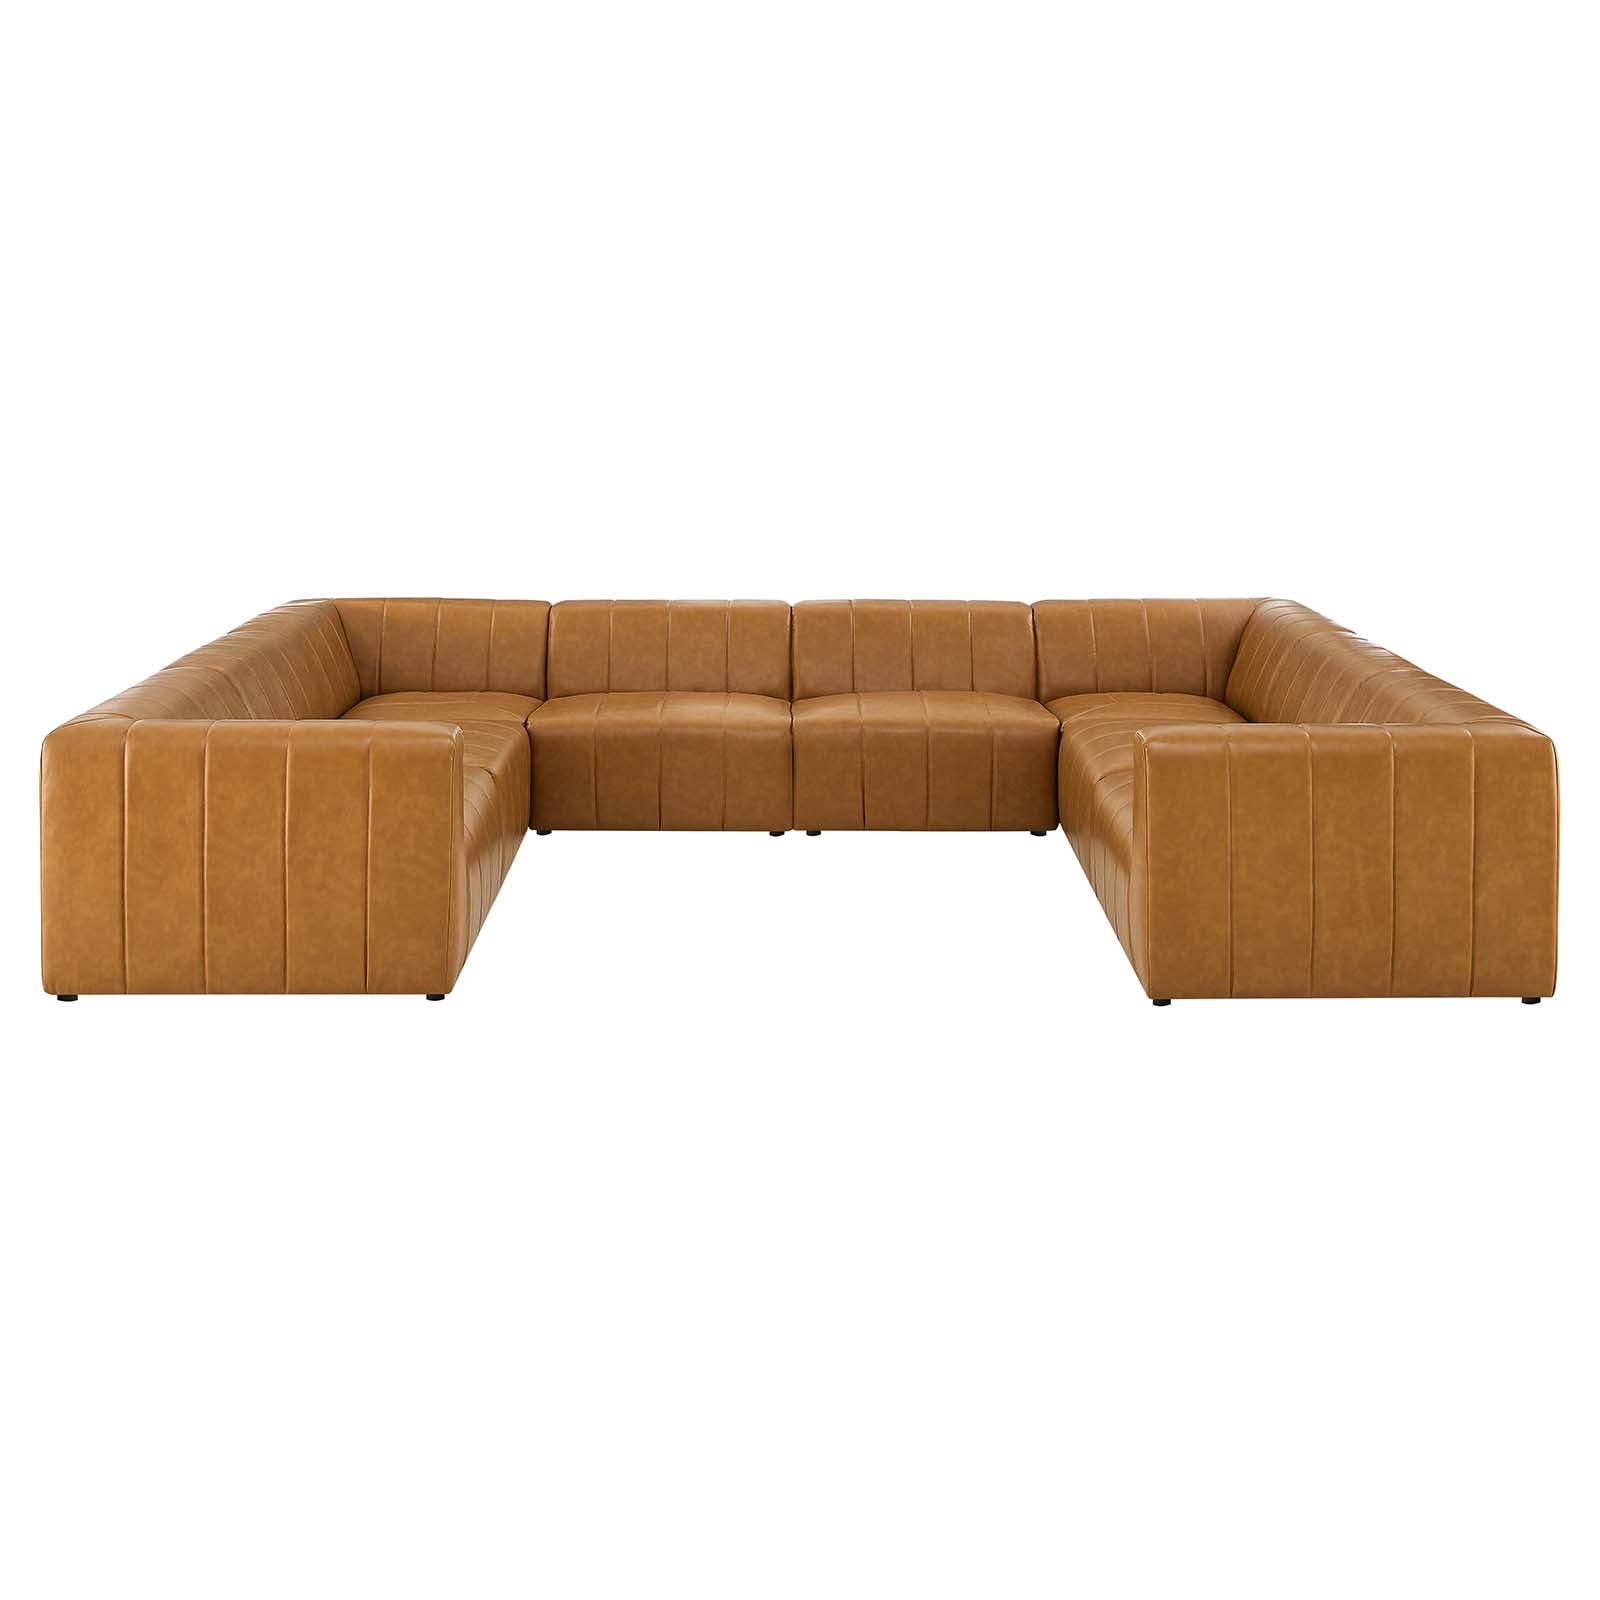 Modway Sectional Sofas - Bartlett Vegan Leather 8-Piece Sectional Sofa Tan